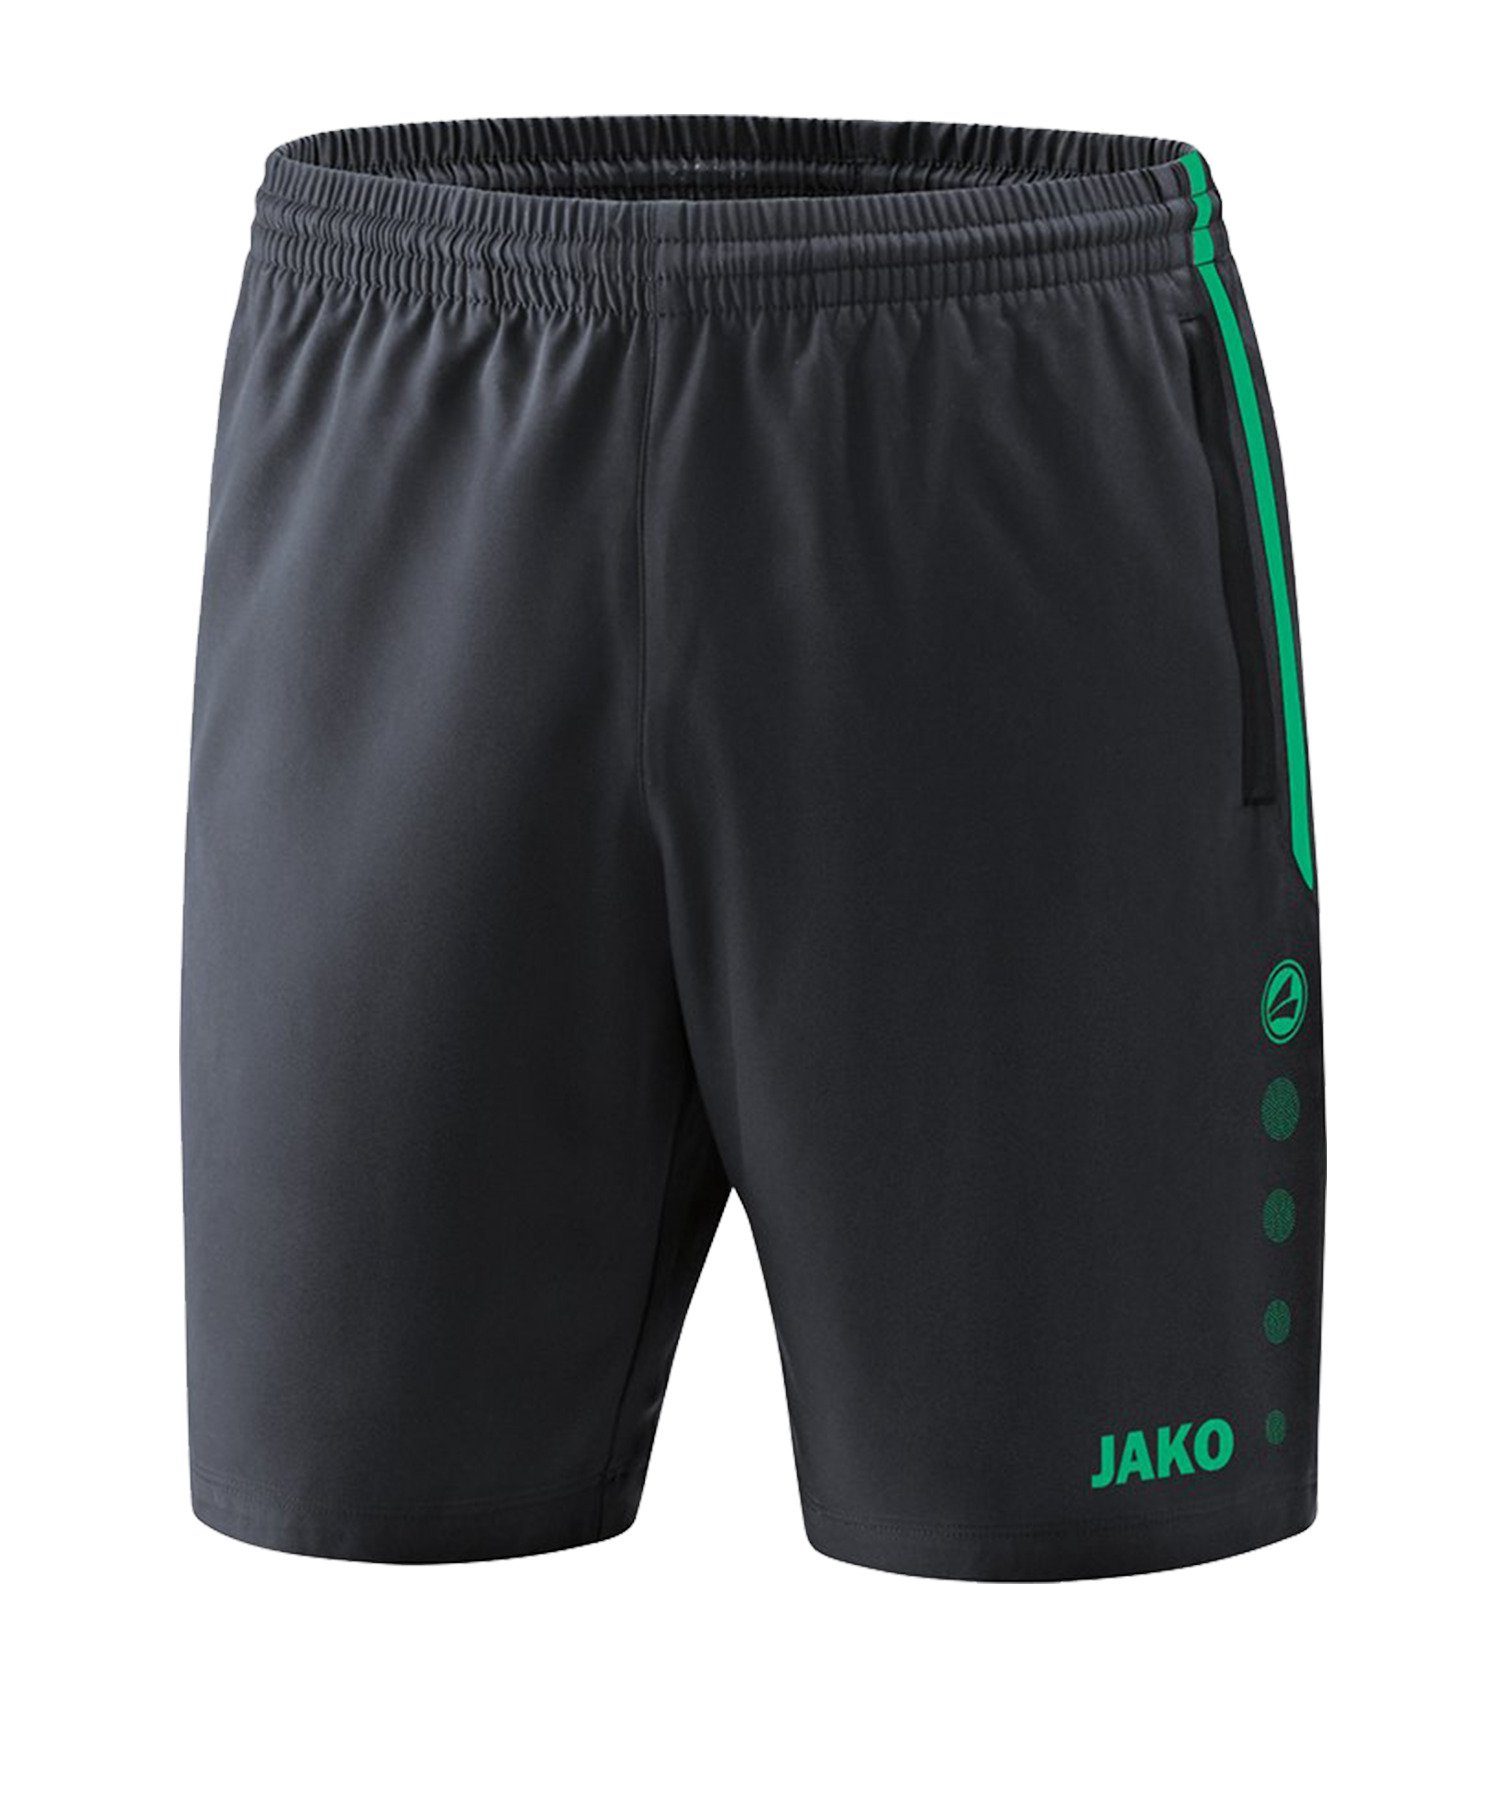 Short Sporthose 2.0 Competition Jako Grautuerkis